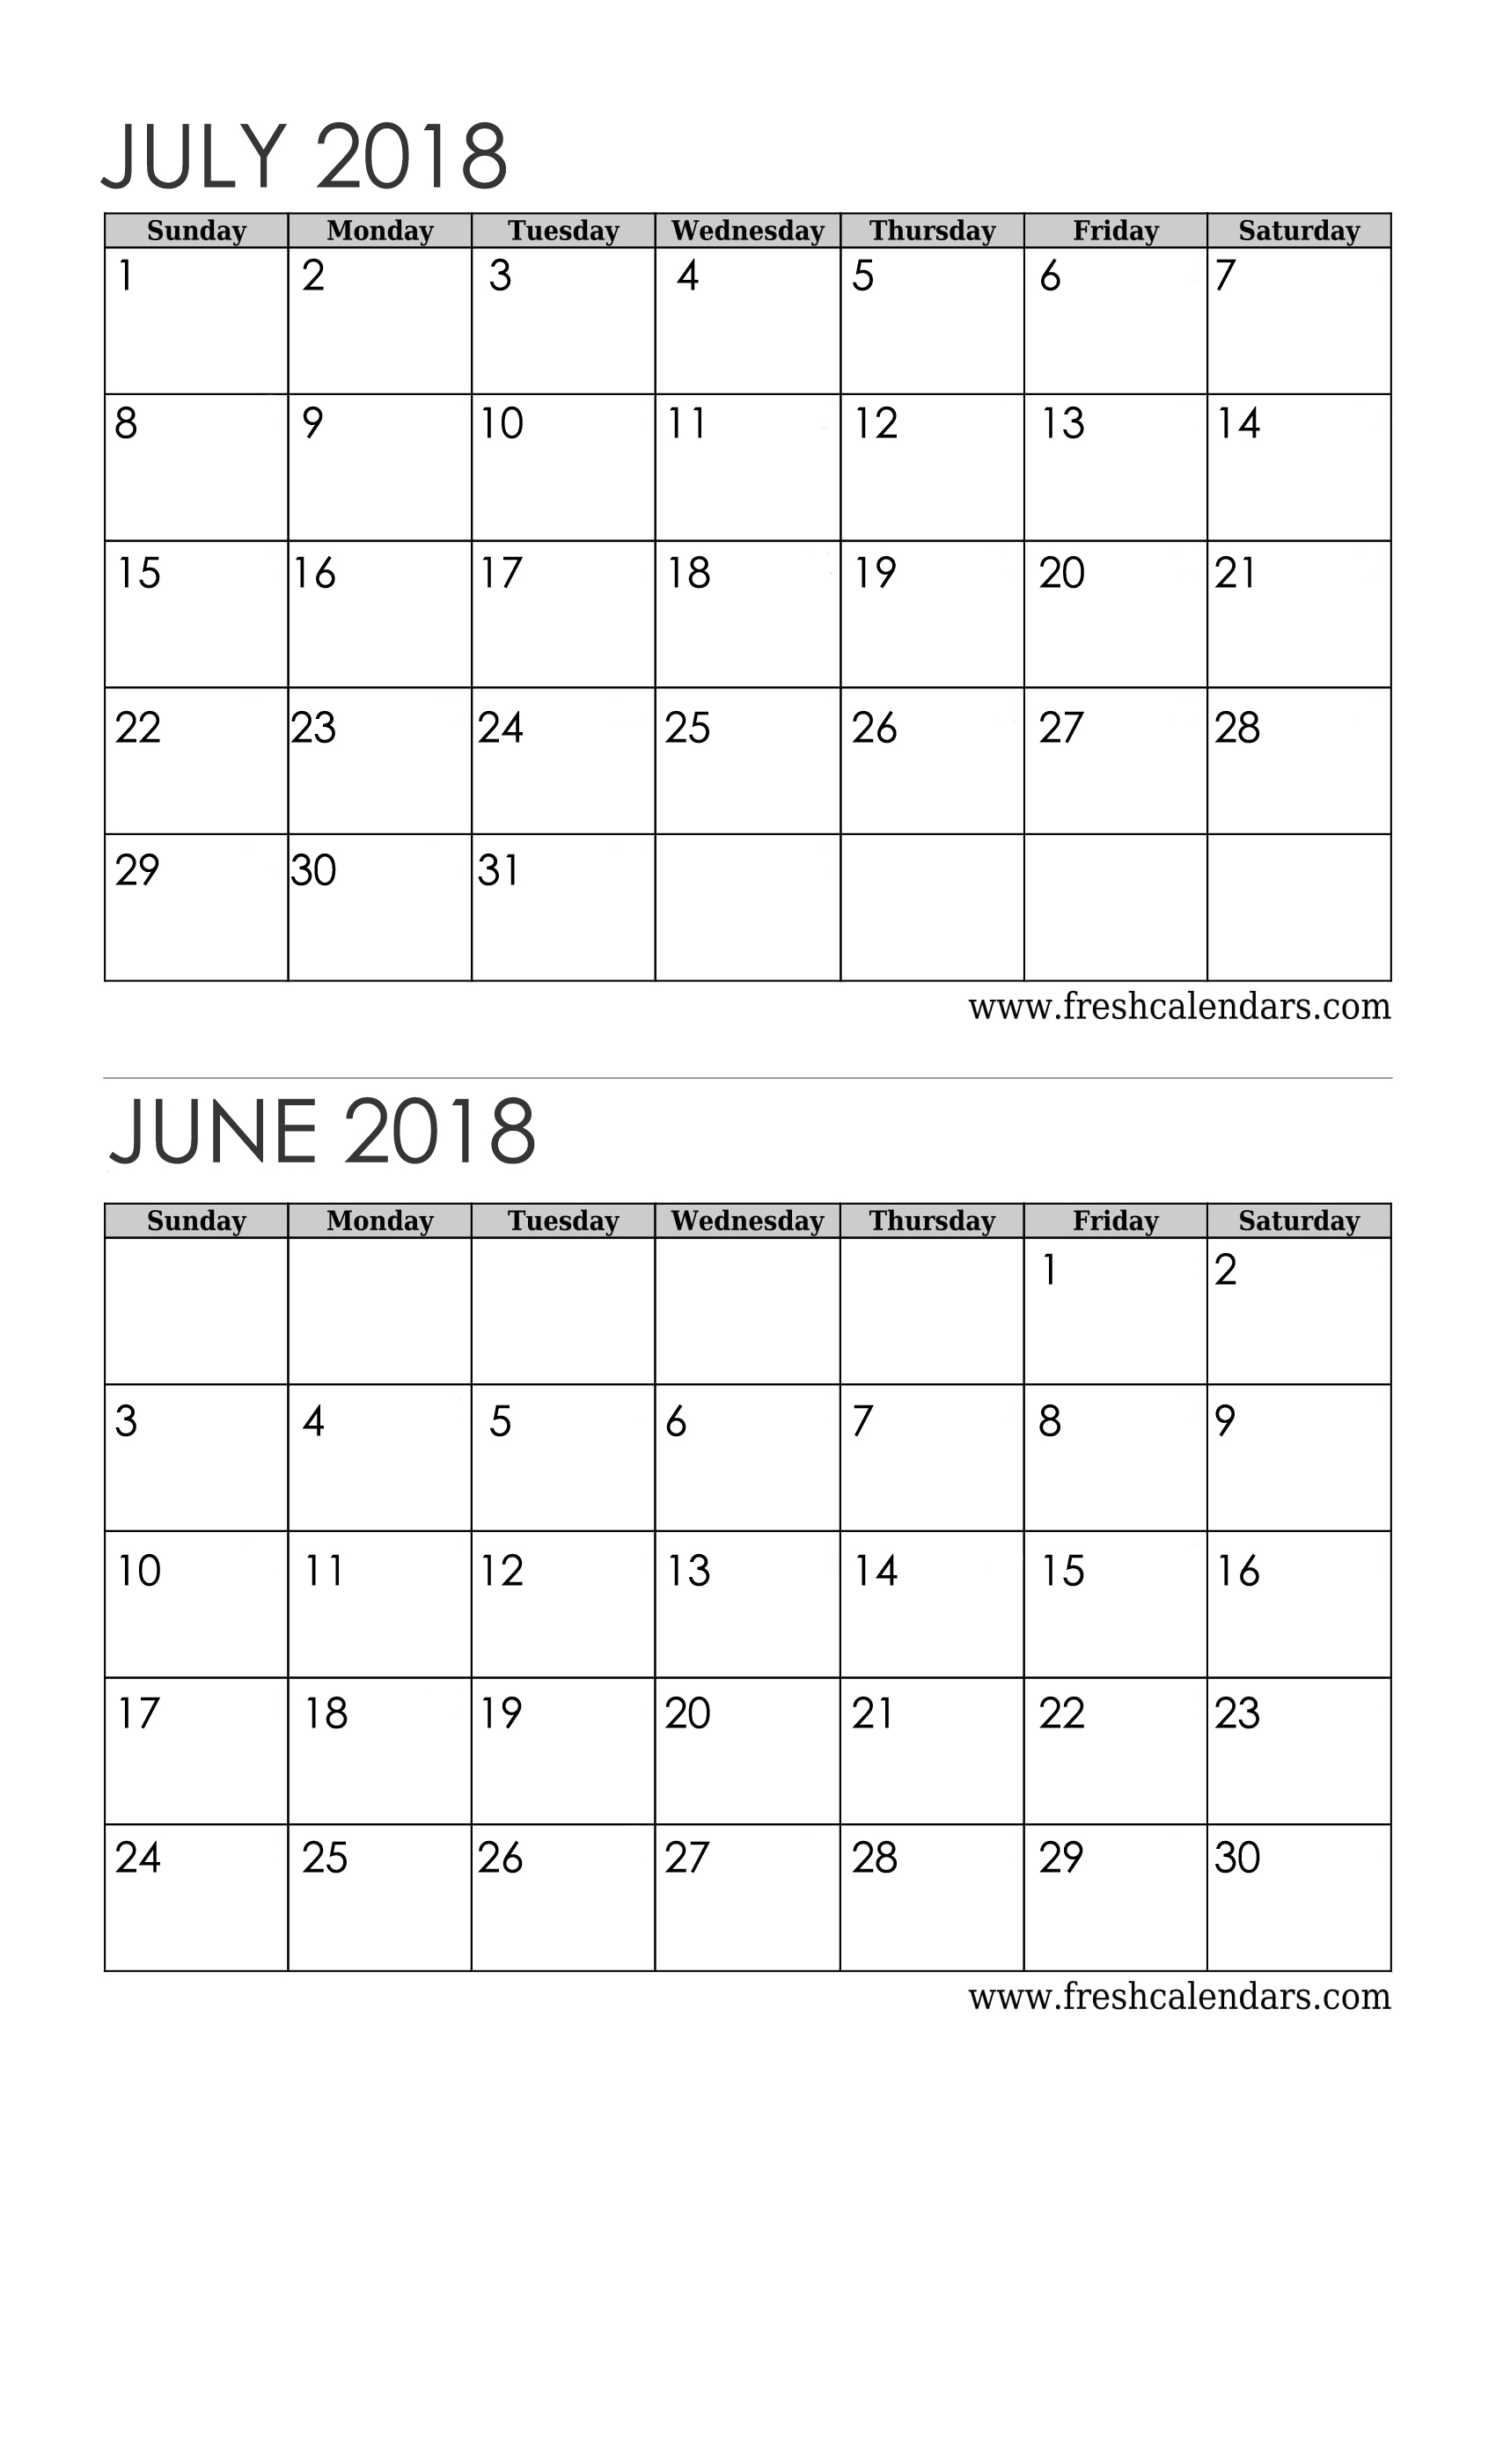 July 2018 calendar with june 2018